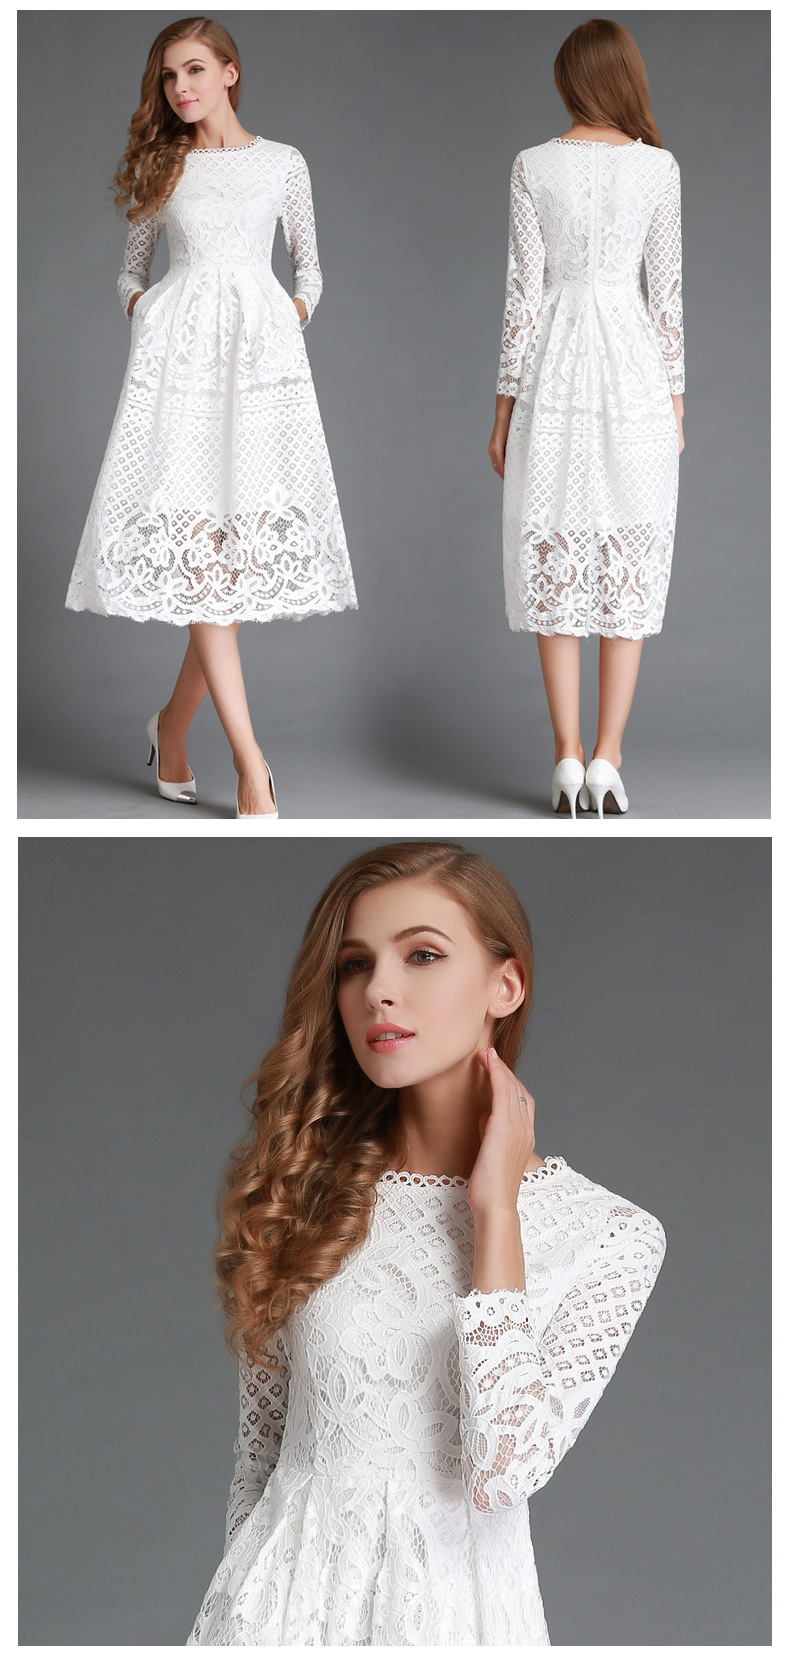 High Quality Hollow Out Elegant White Lace Dress Women